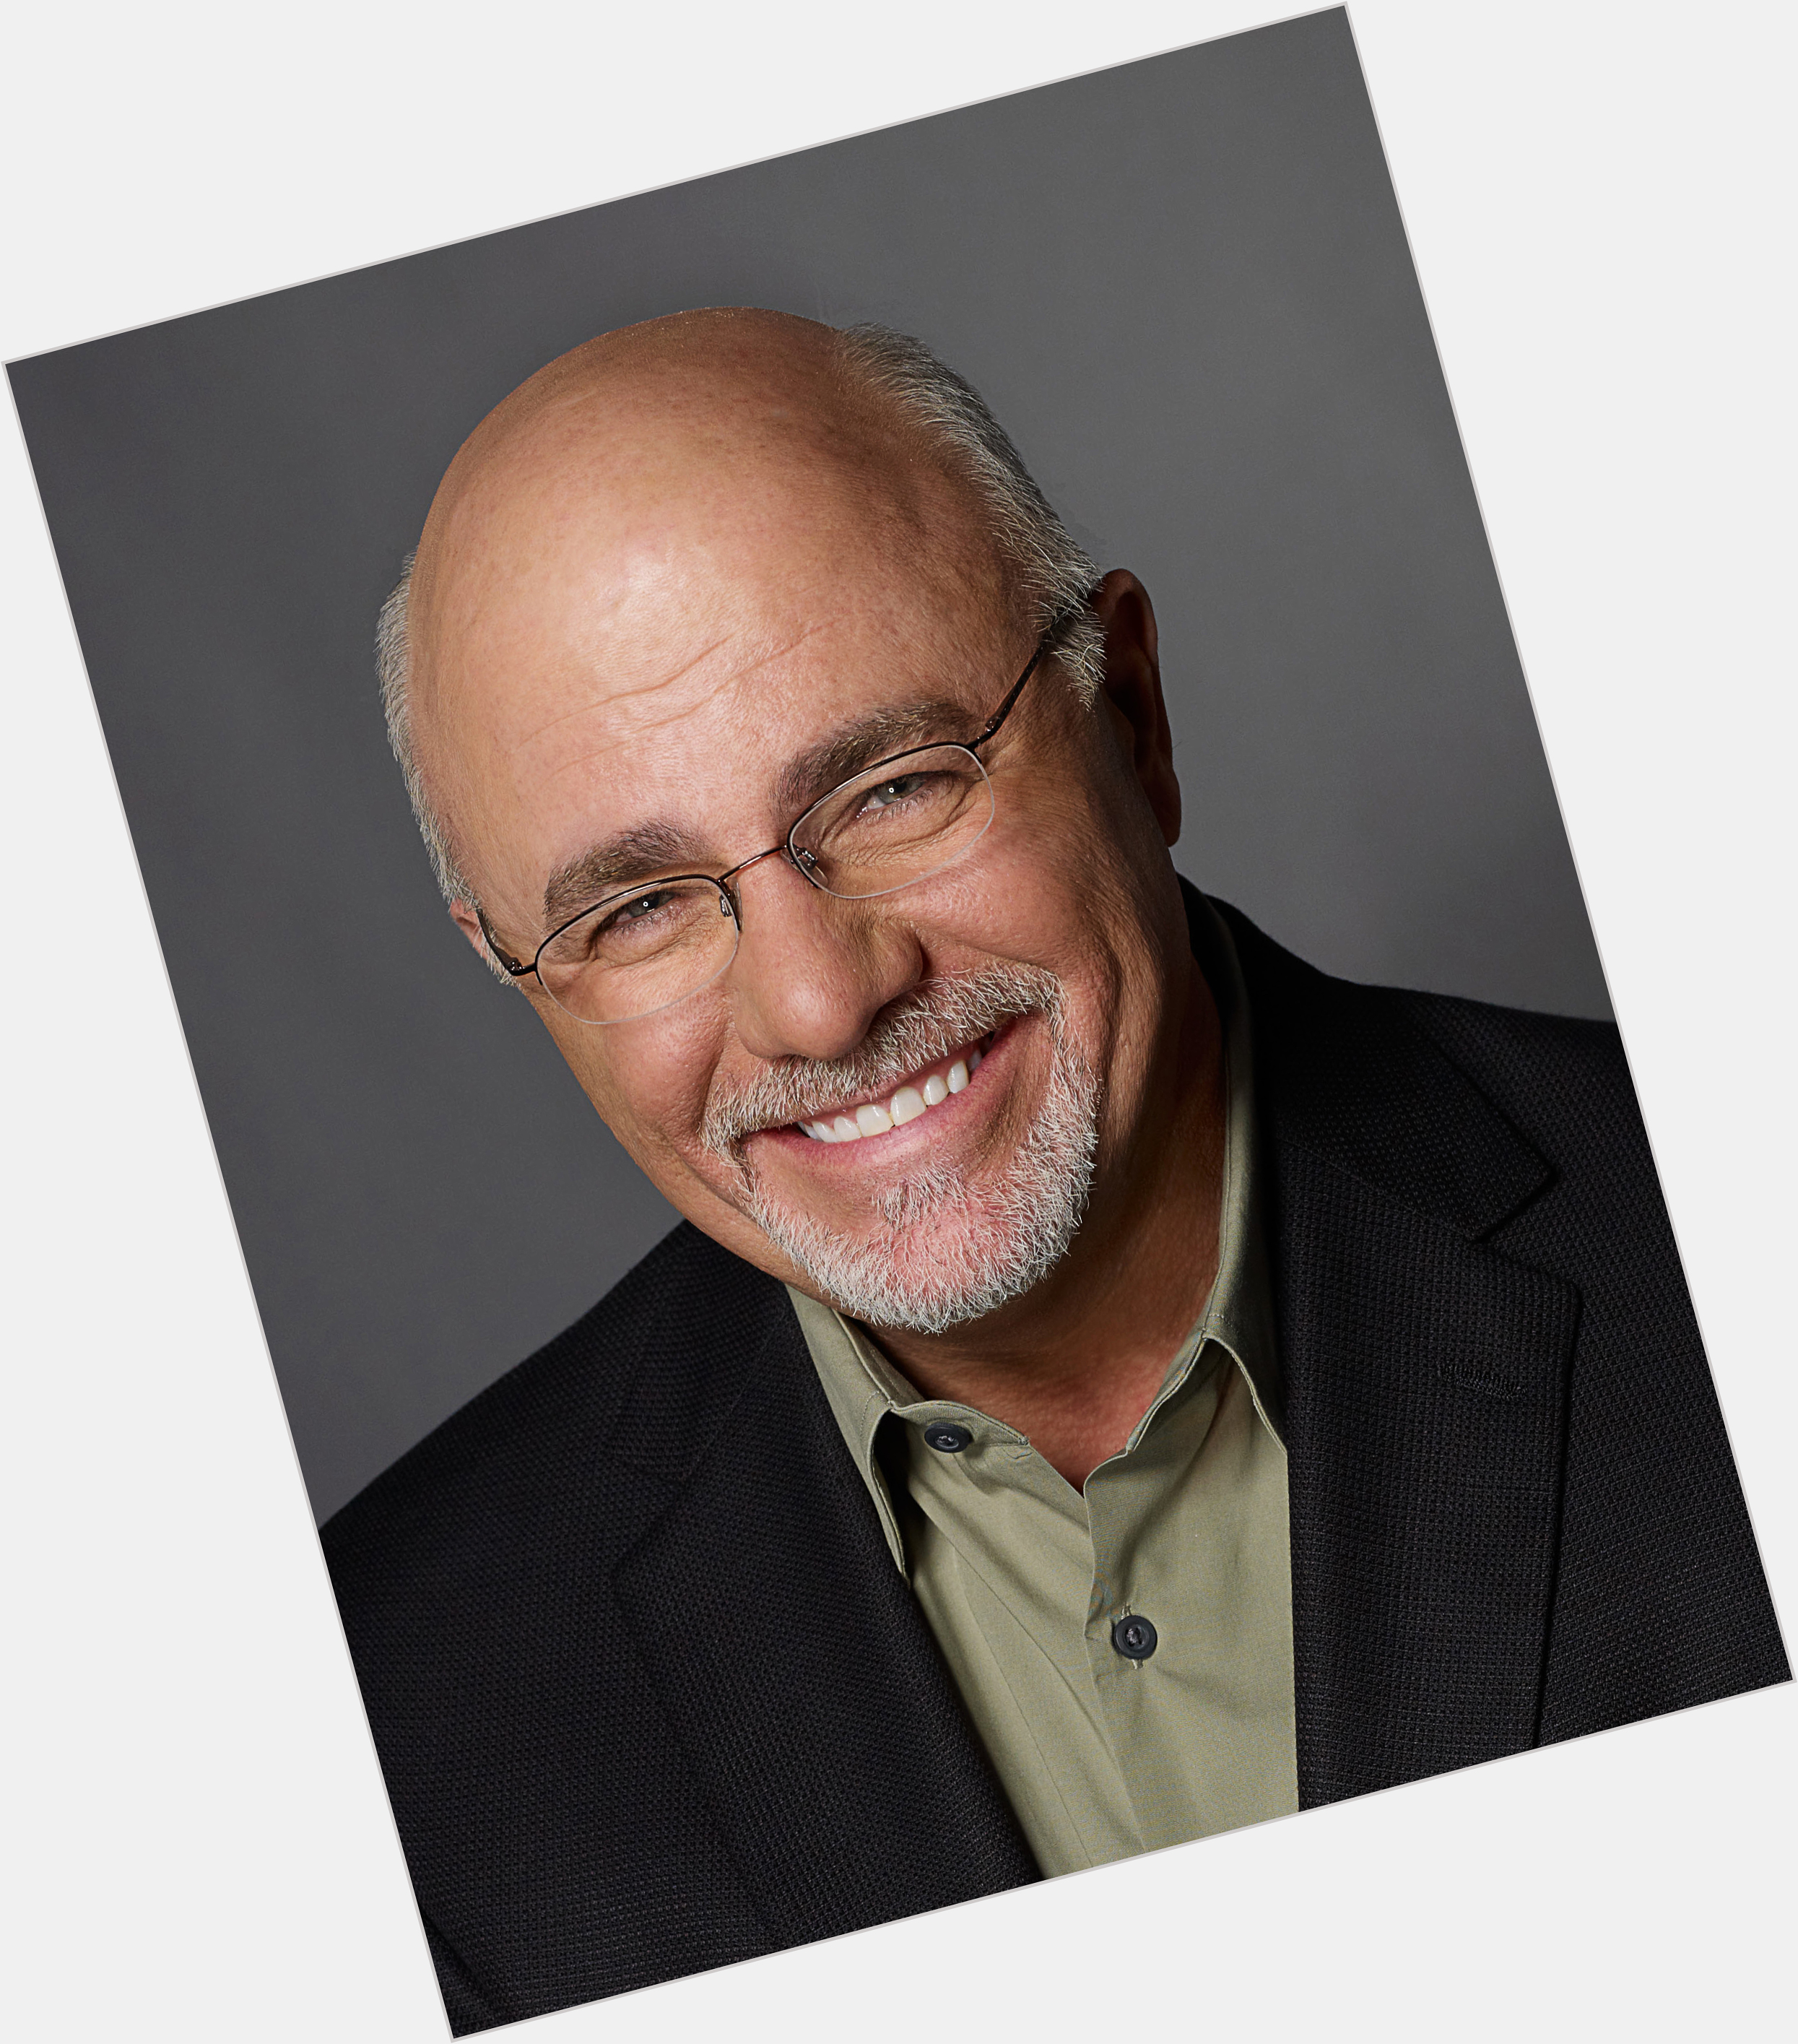 Dave Ramsey exclusive hot pic 4.jpg